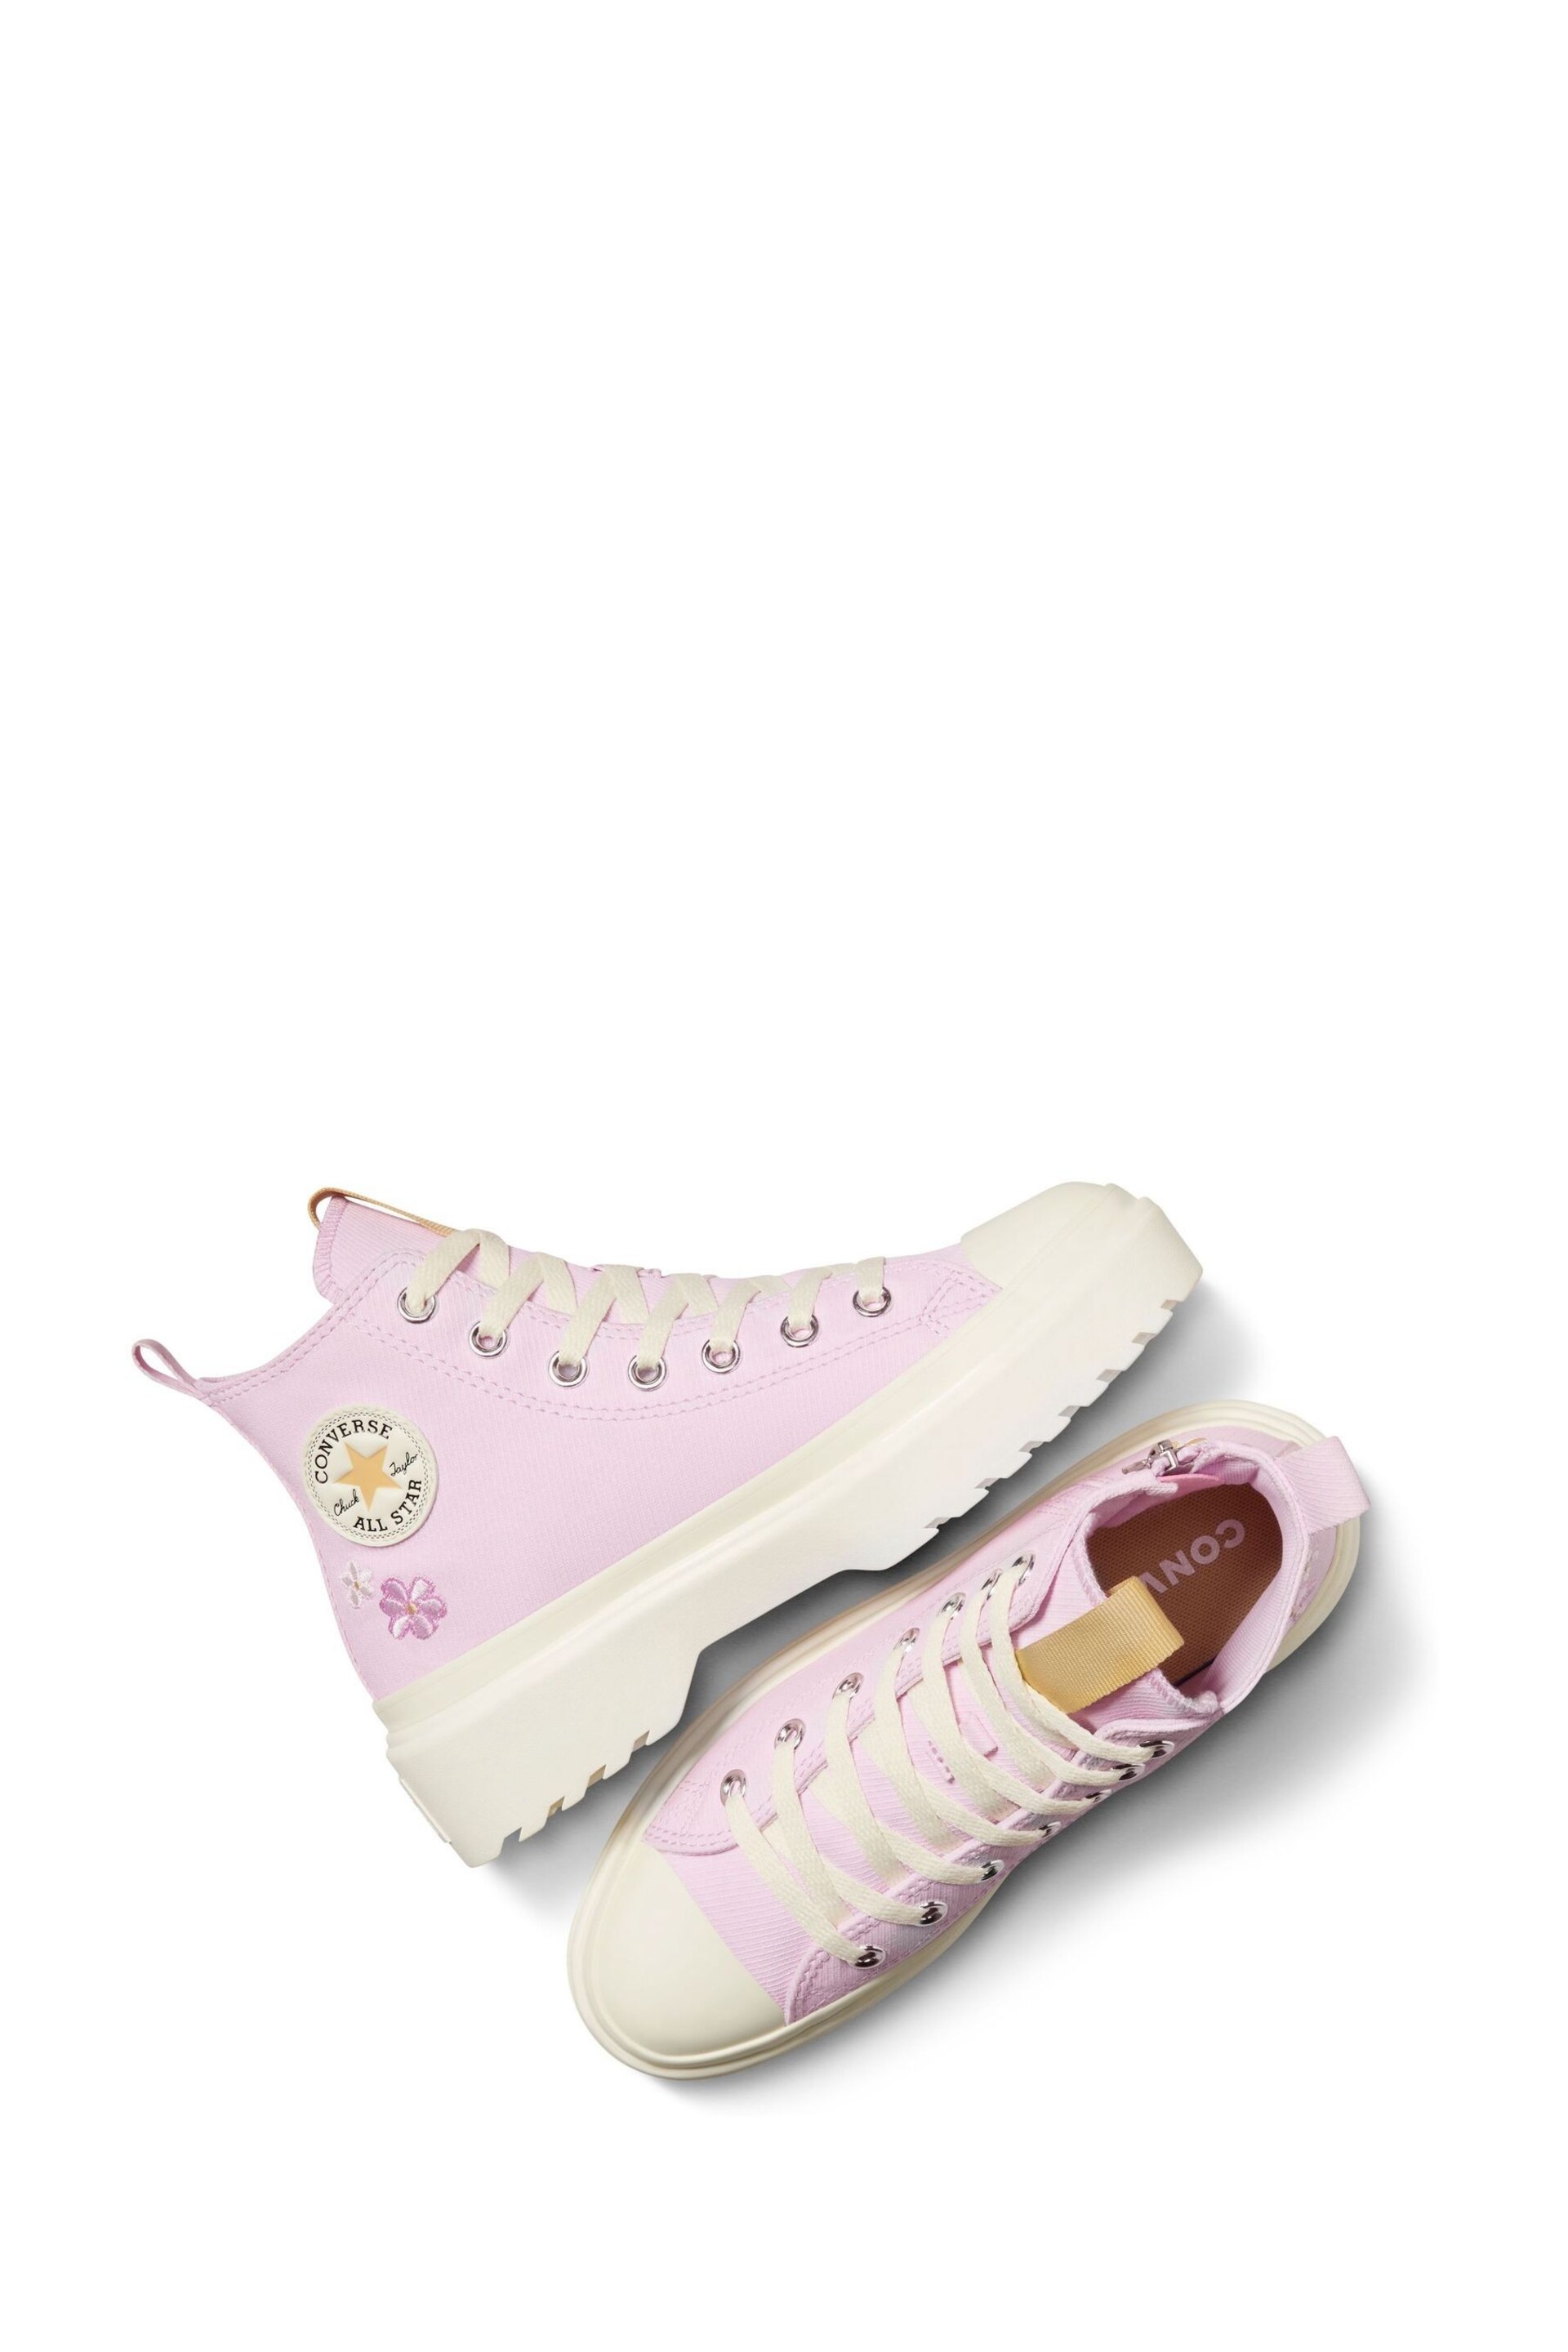 Converse Purple Chuck Taylor Flower Embroidered Lugged Lift Junior Trainers - Image 11 of 12